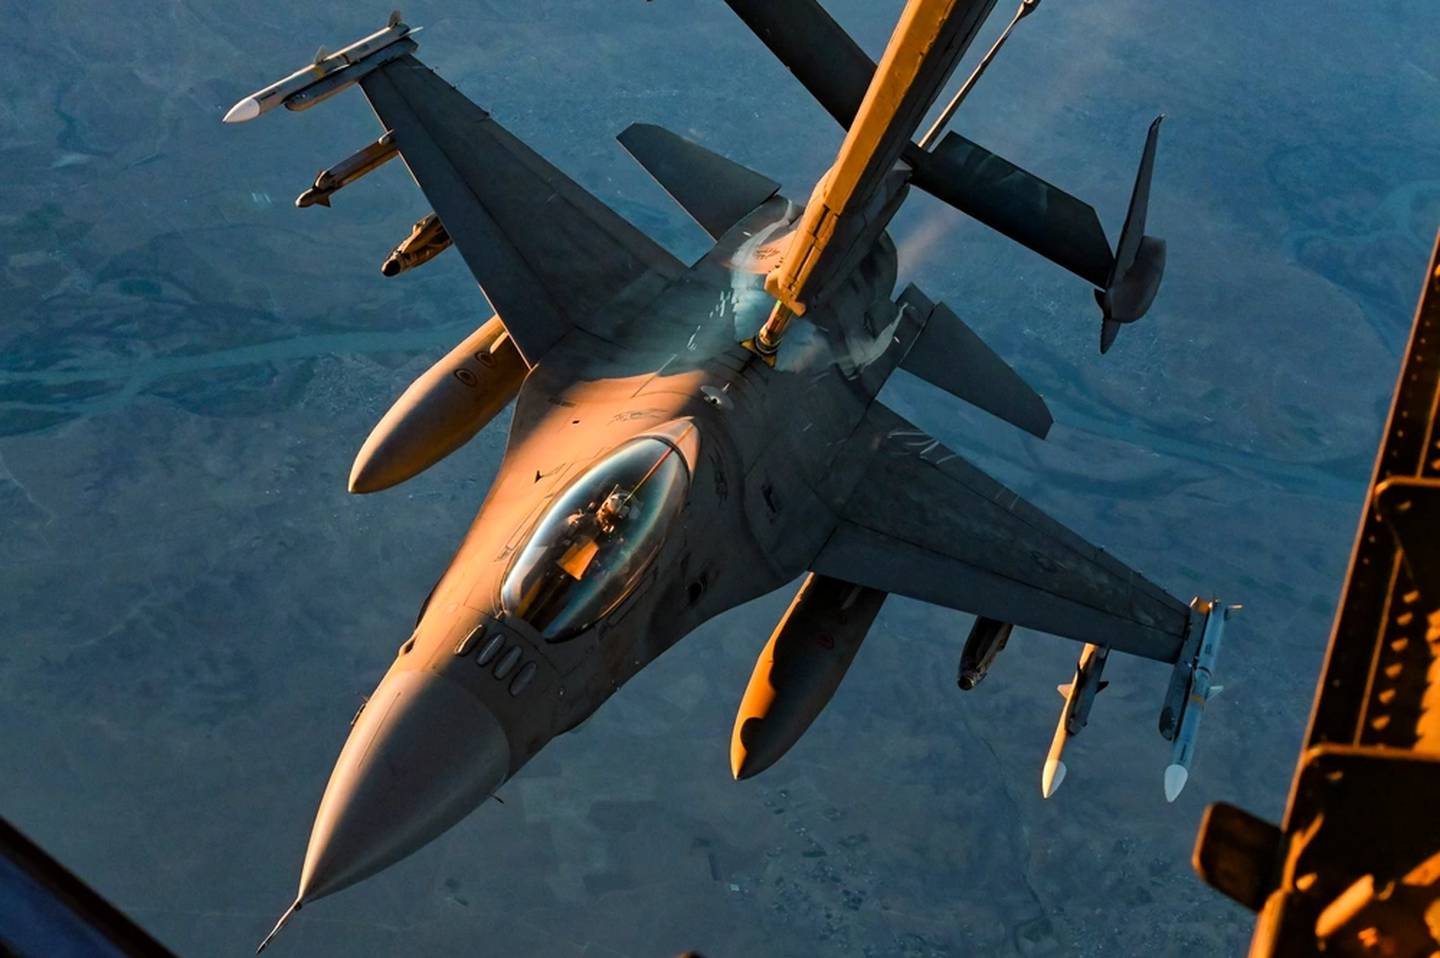 A U.S. Air Force F-16 Fighting Falcon connects with a U.S. Air Force KC-10 Extender over Iraq, Nov. 5, 2021. The F-16 is a compact, multi-role fighter aircraft that delivers war-winning airpower to U.S. Central Command. (Staff Sgt. Jerreht Harris/Air Force)